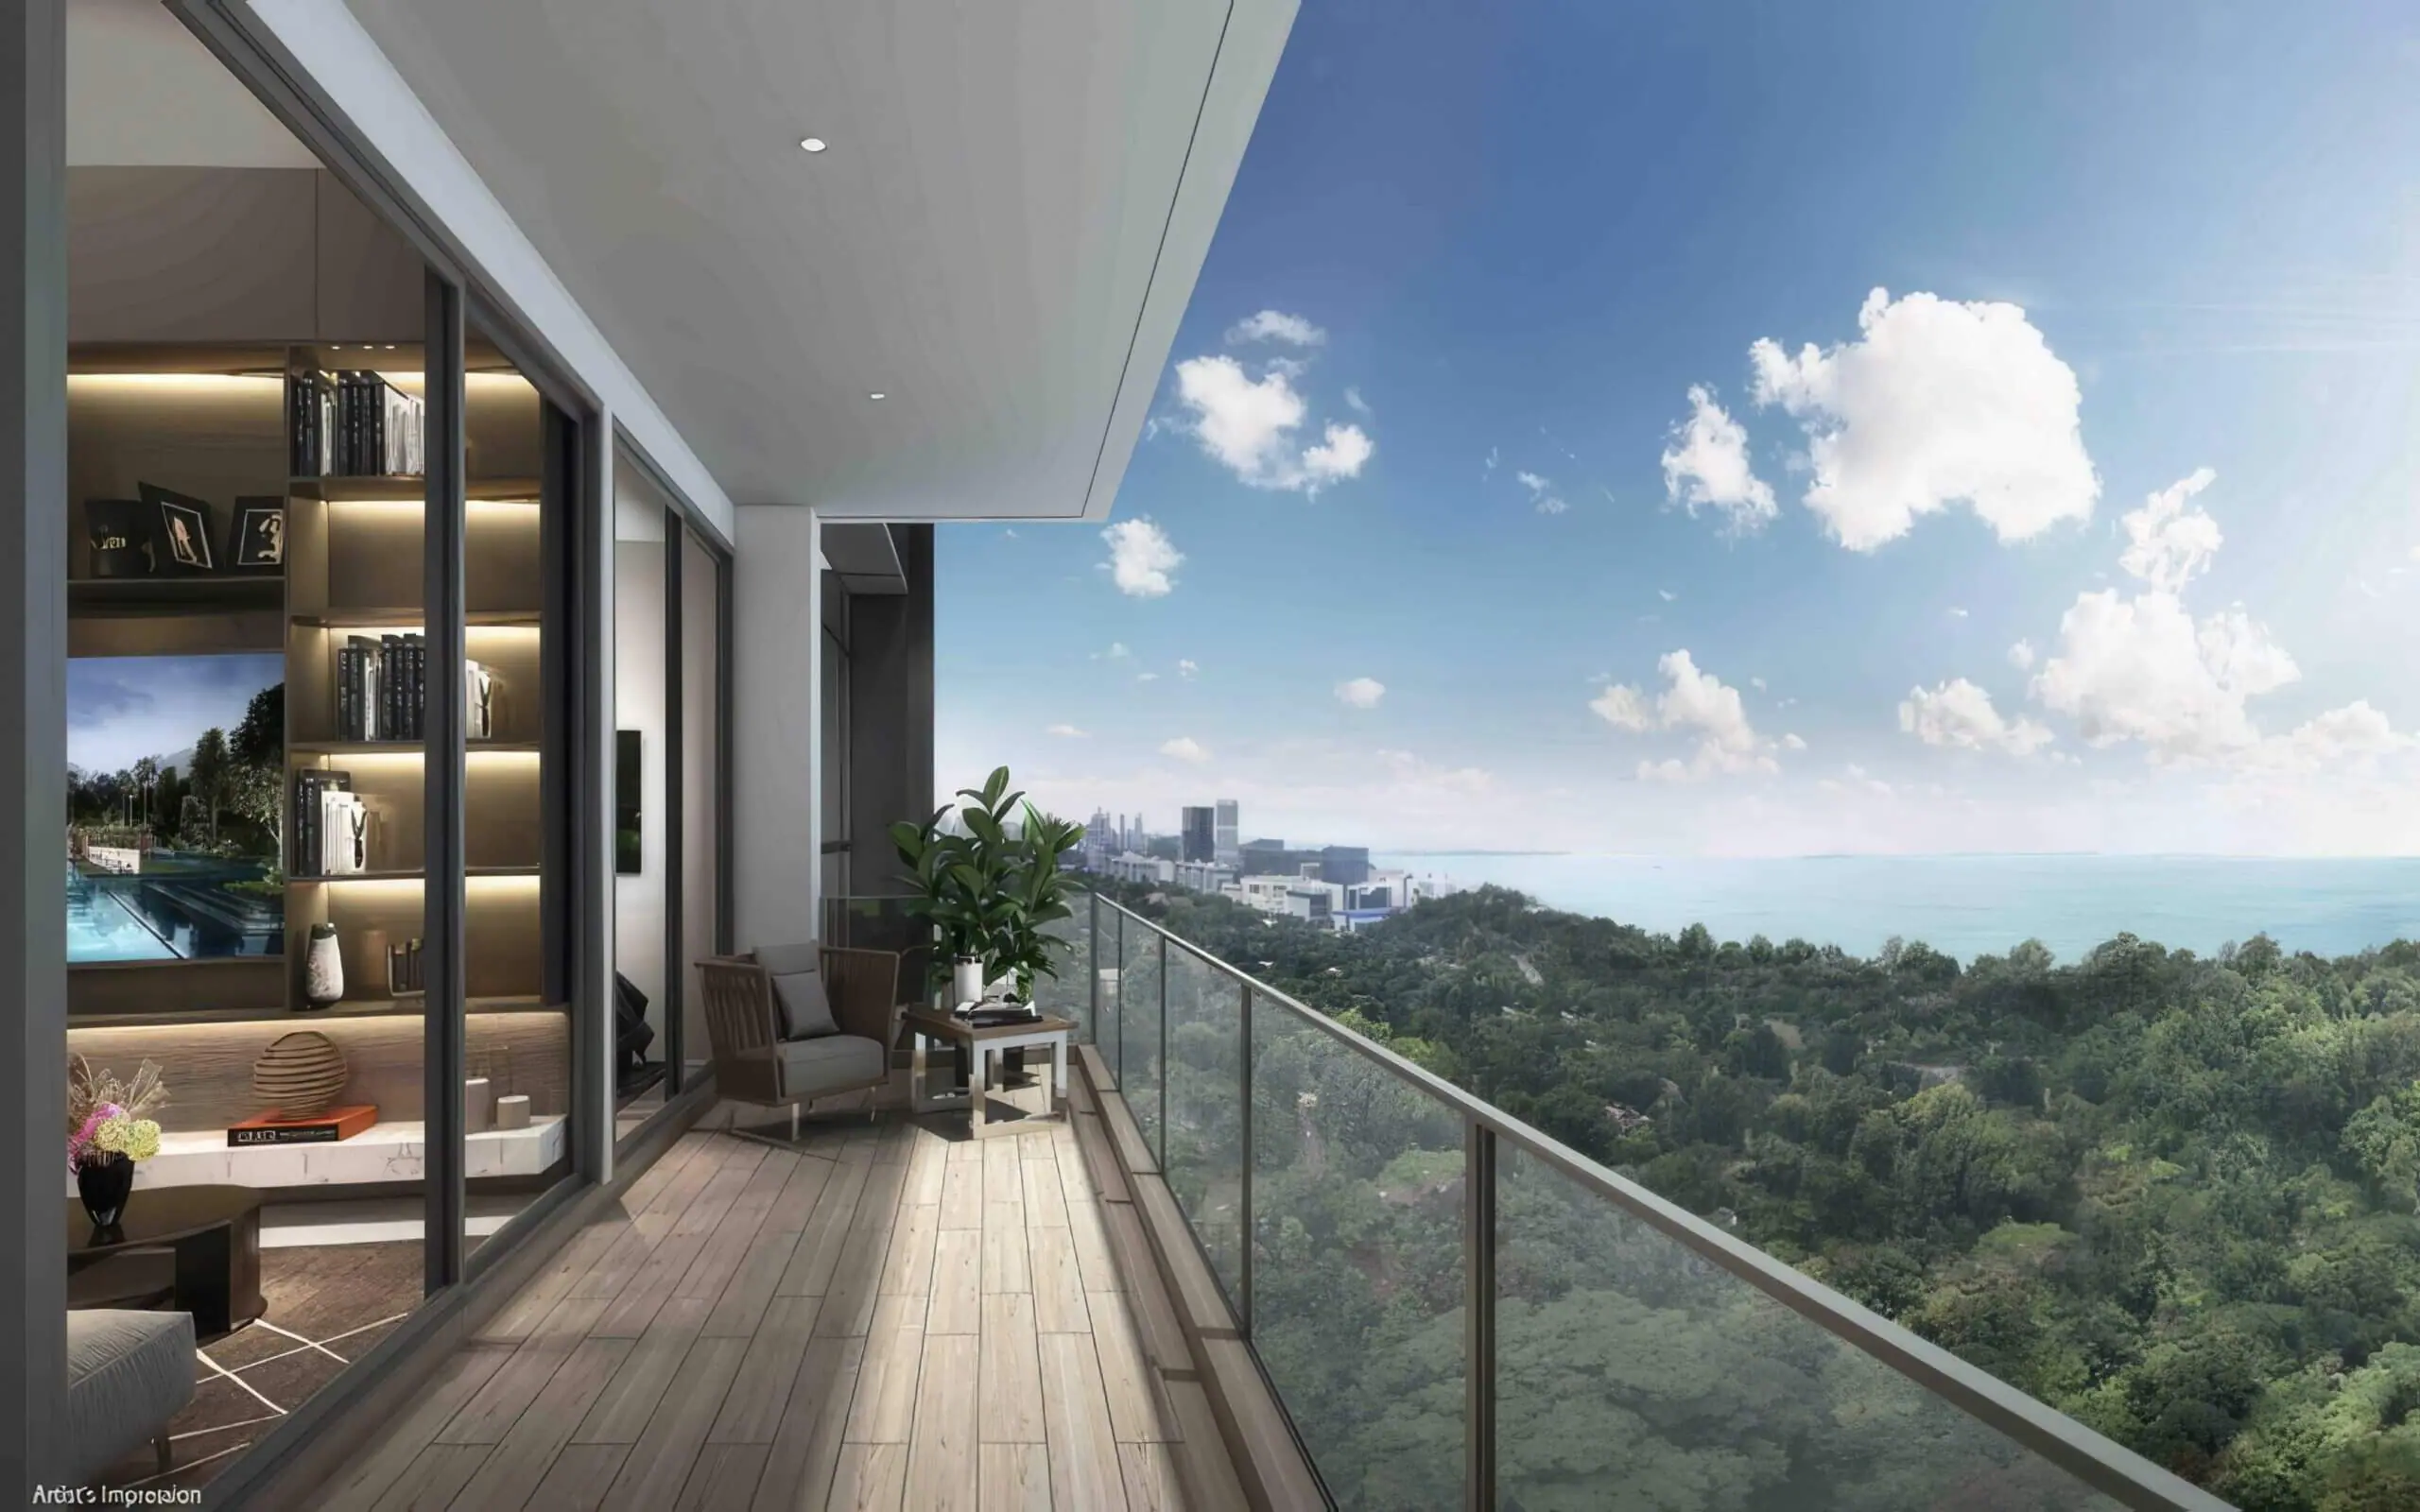 Chuan Park Residences: A Serene Oasis in the Heart of Singapore